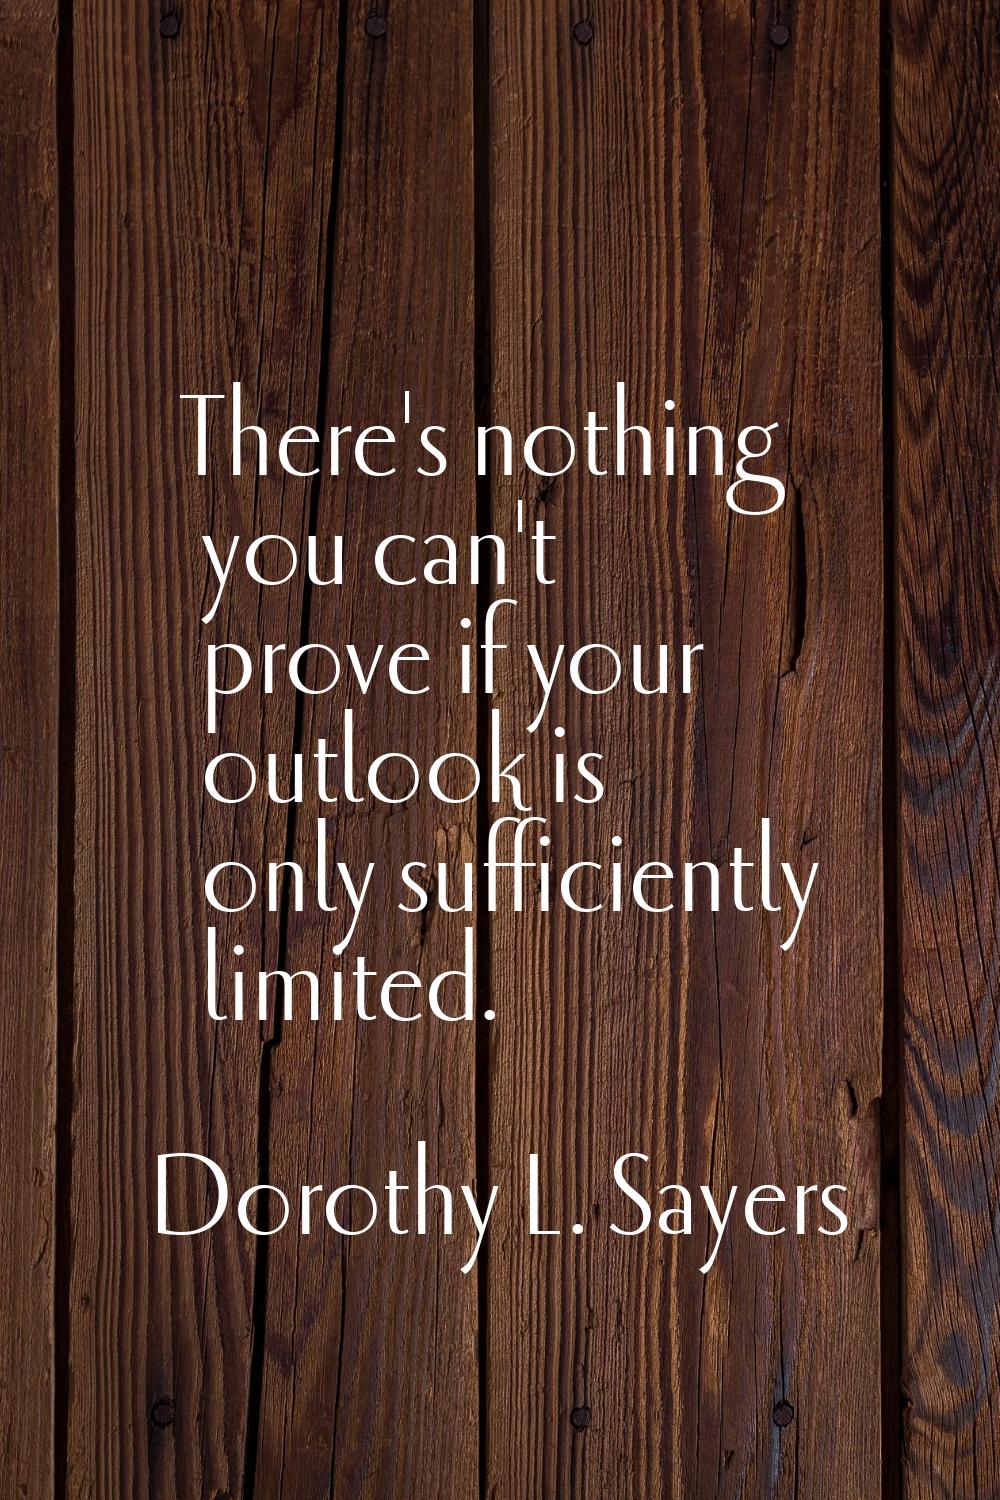 There's nothing you can't prove if your outlook is only sufficiently limited.